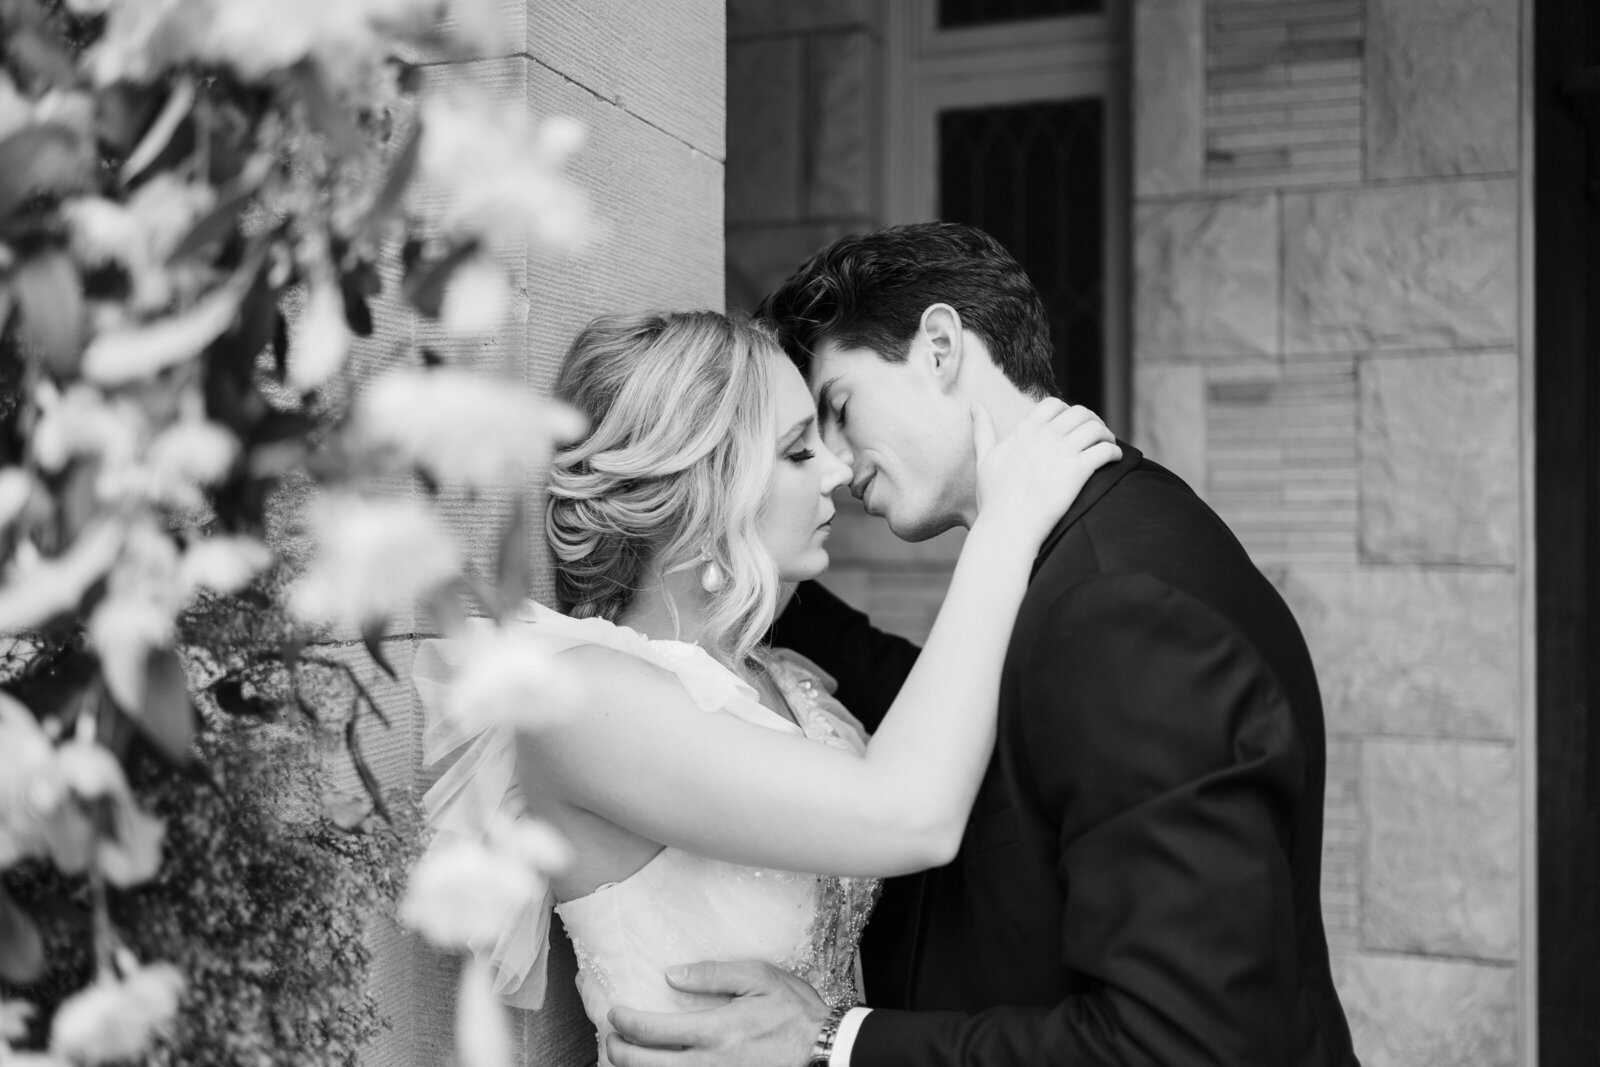 A bride leans against the wall of a villa while her husband leans in for a kiss